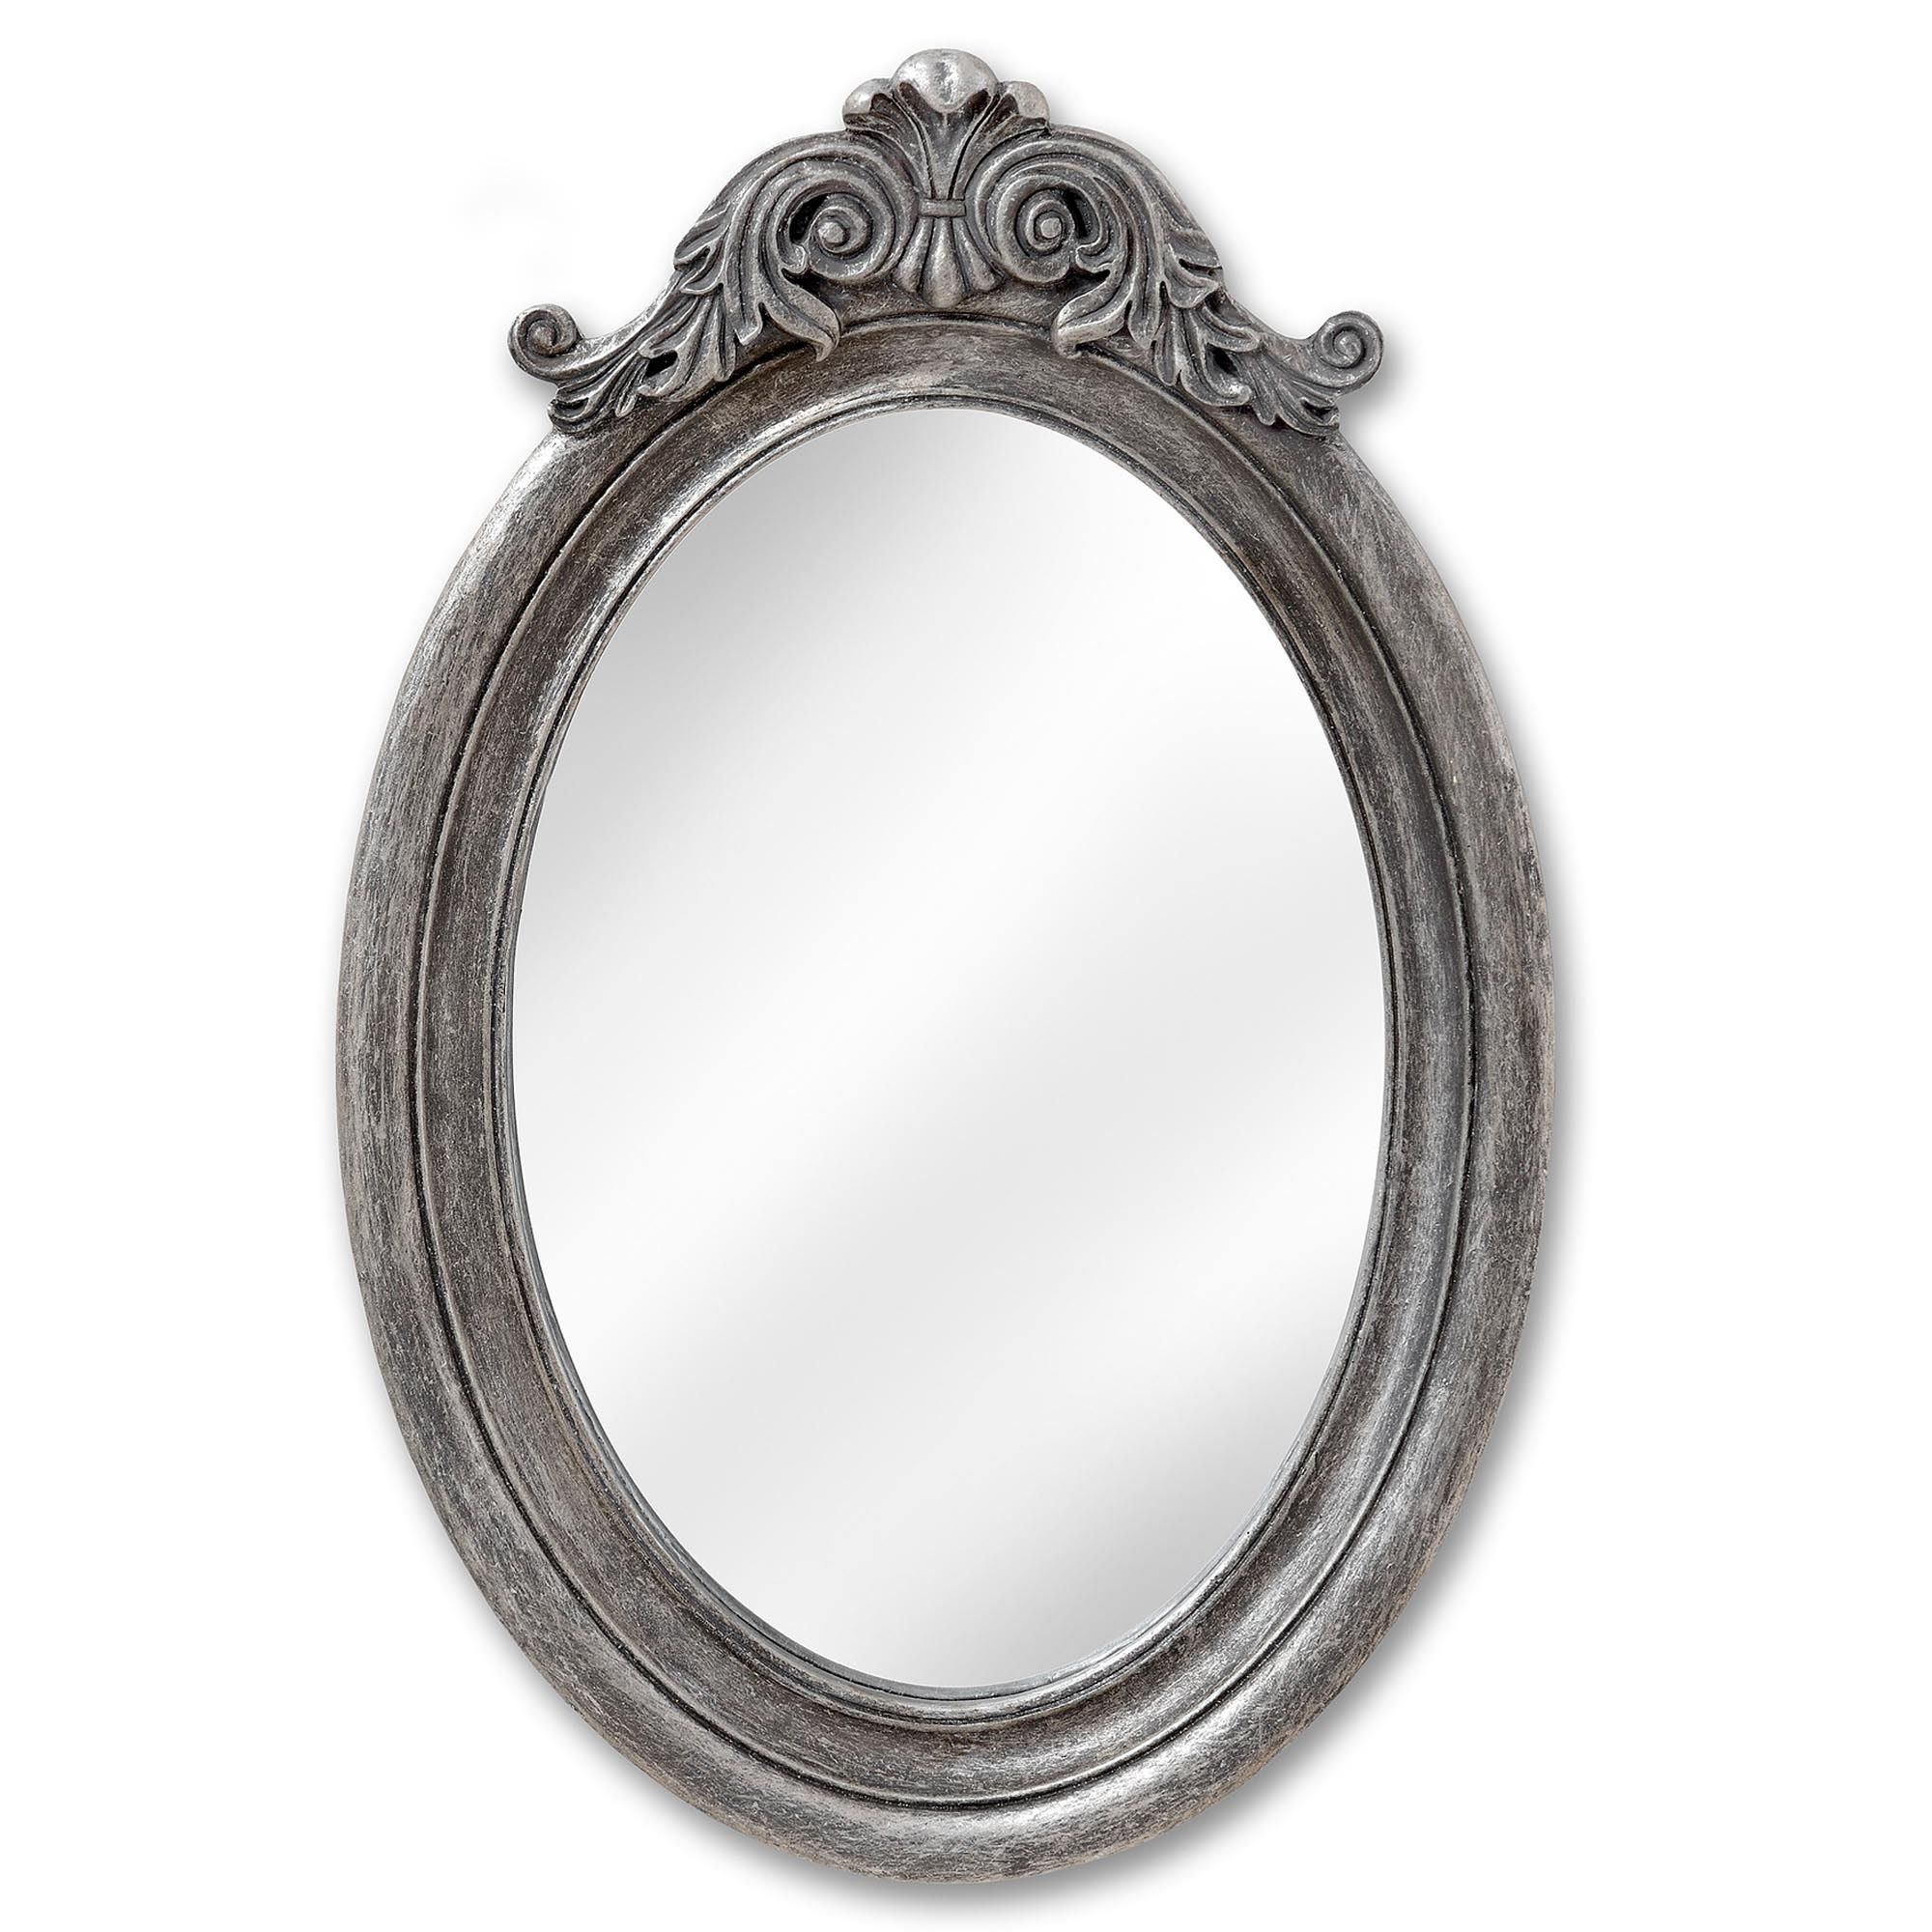 Antique French Style Silver Oval Wall Mirror | Homesdirect365 For Antiqued Silver Quatrefoil Wall Mirrors (View 7 of 15)